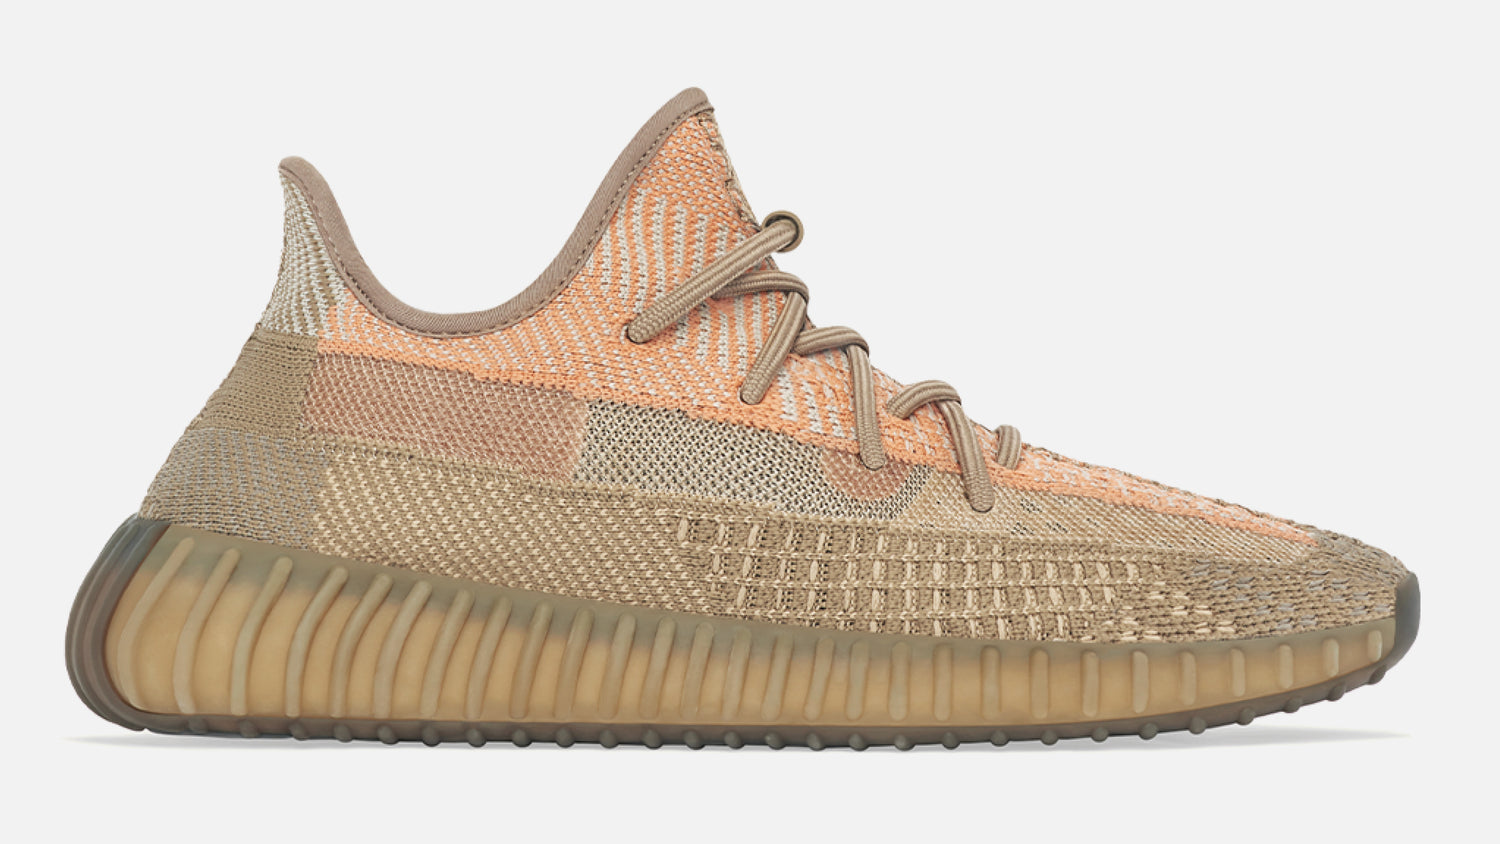 adidas Yeezy Boost 350 V2 (Sand Taupe/Sand Taupe/Sand Taupe)